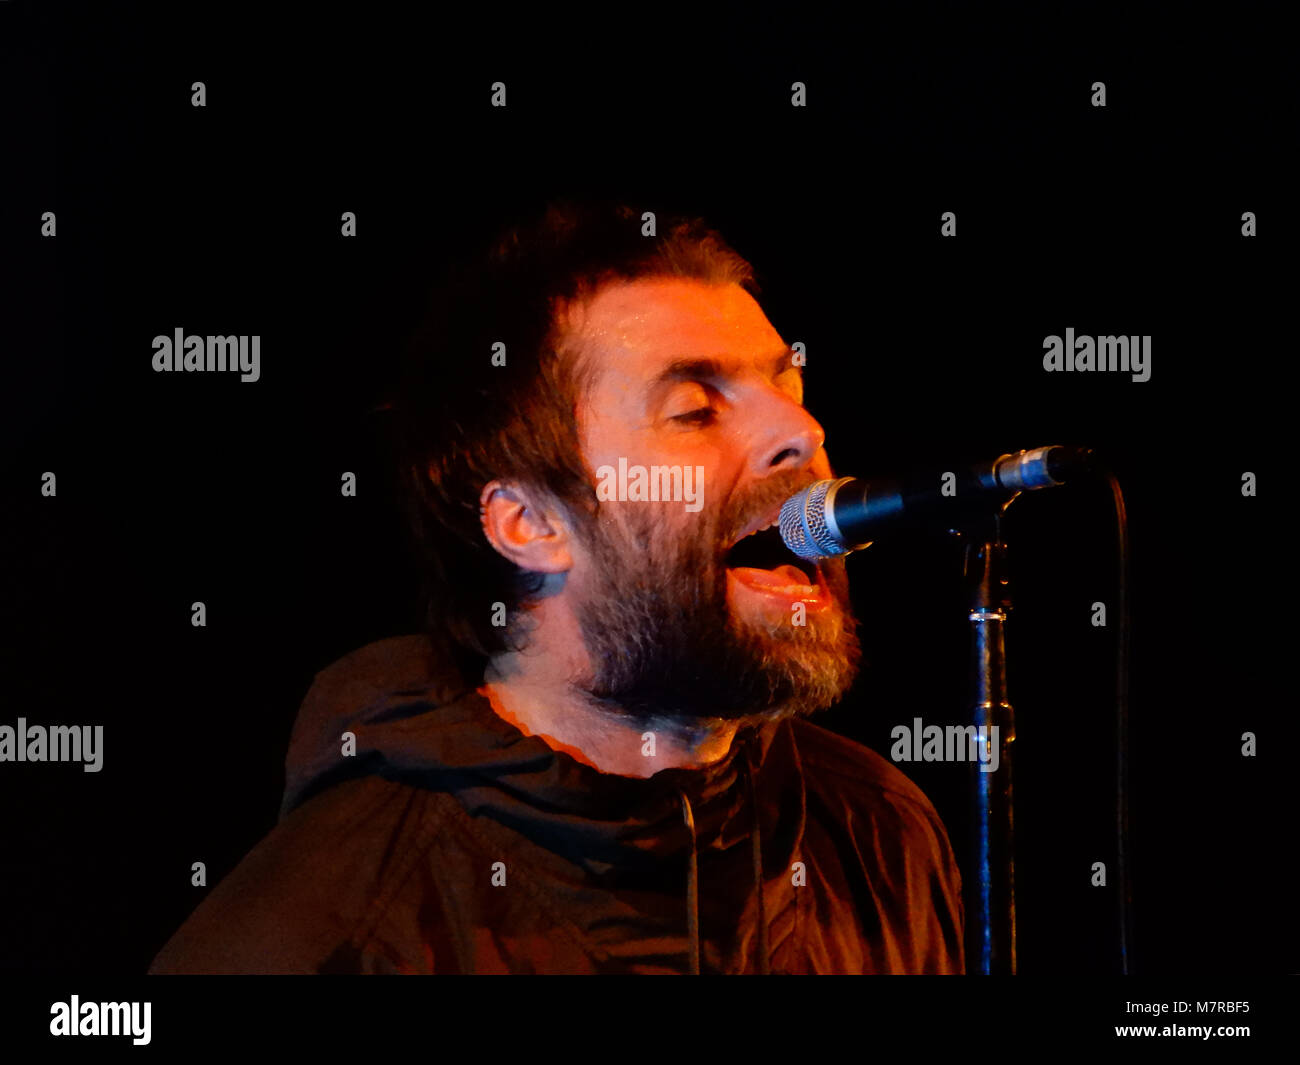 MILAN, ITALY, FEBRUARY 26, 2018 - Liam Gallagher performs in concert at Fabrique in Milan, Italy on February 26, 2018. Stock Photo